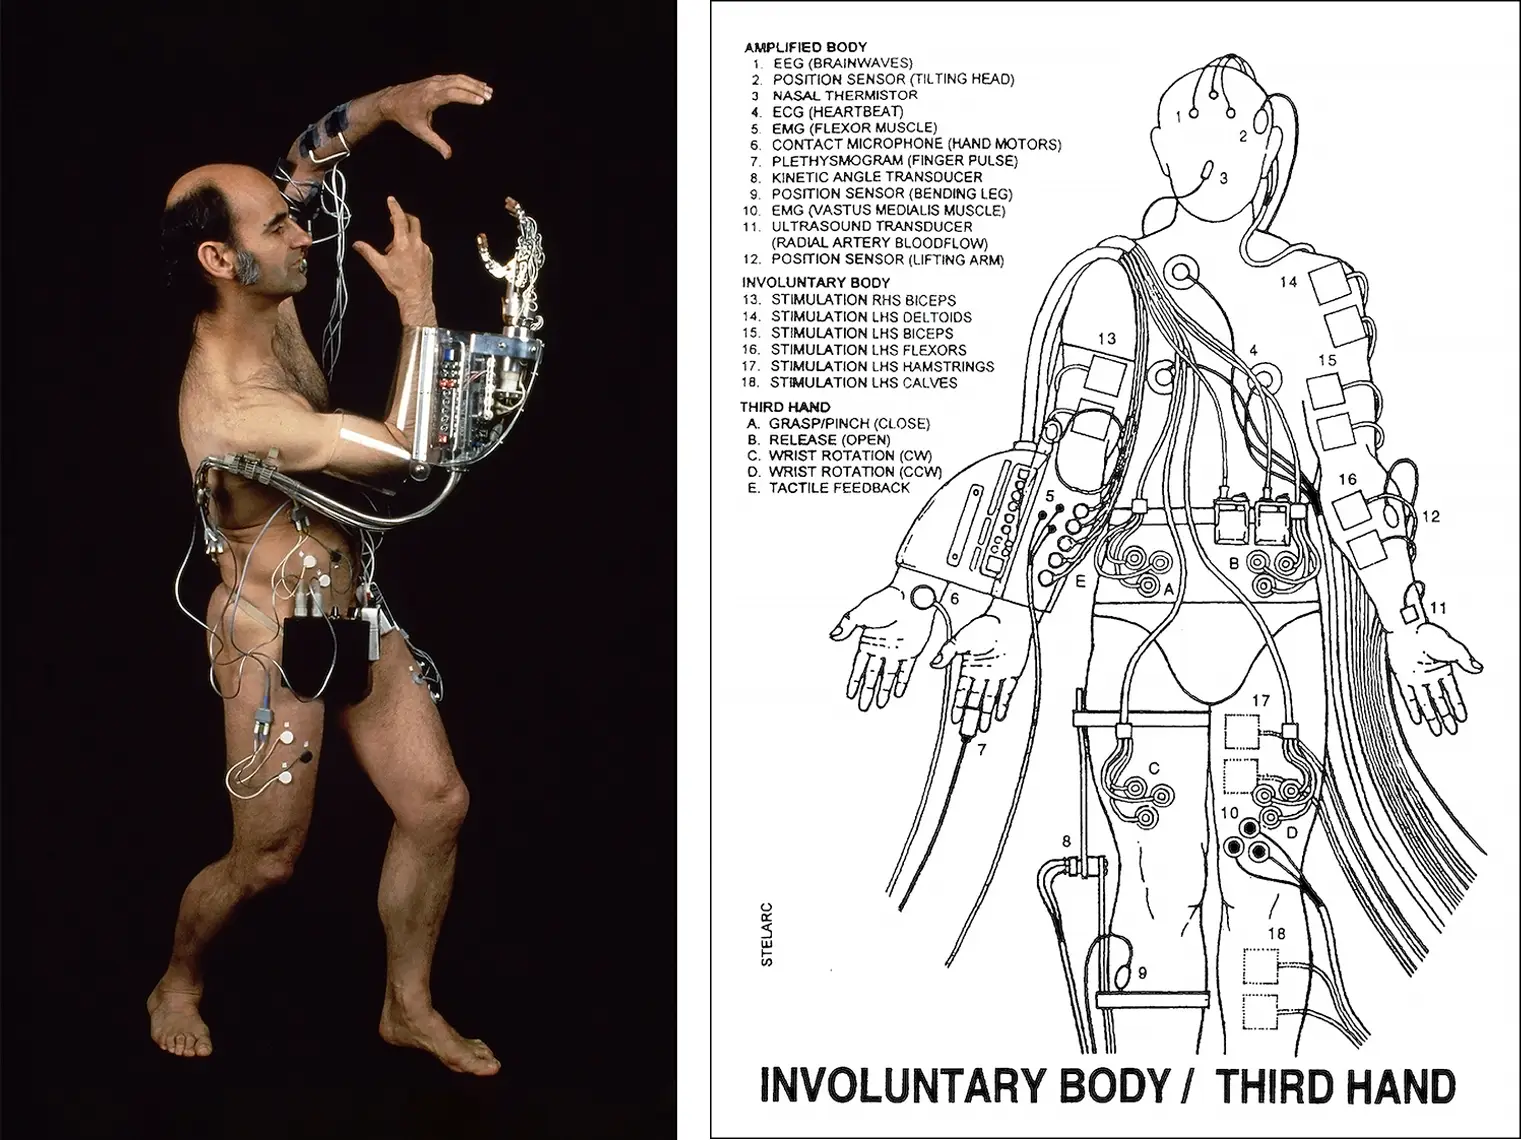 Stelarc appears nude wearing a mechanical arm prosthesis mounted to his right arm while a series of tubes, electromechanical boxes and wires are fastened across his body.